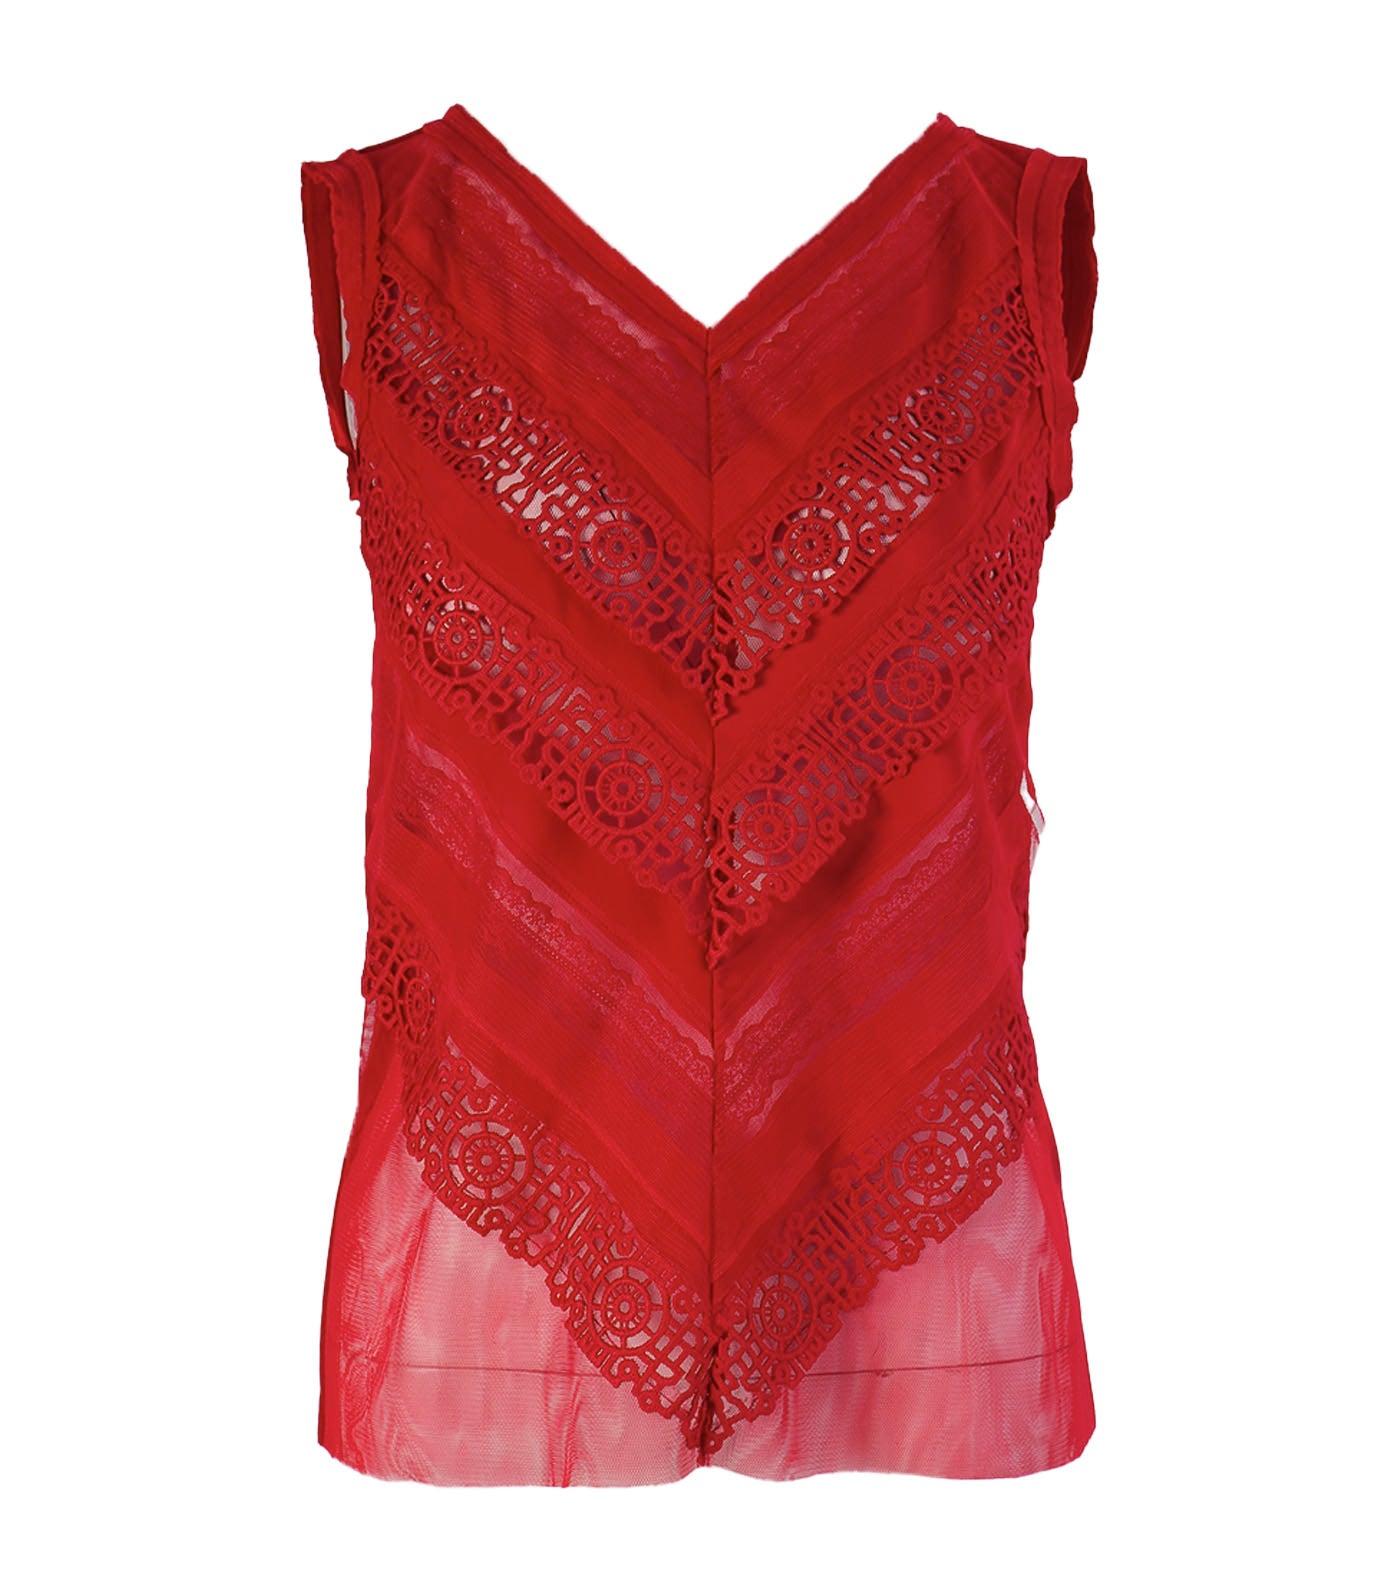 Metasign Lace With Rigid Netting Top Red